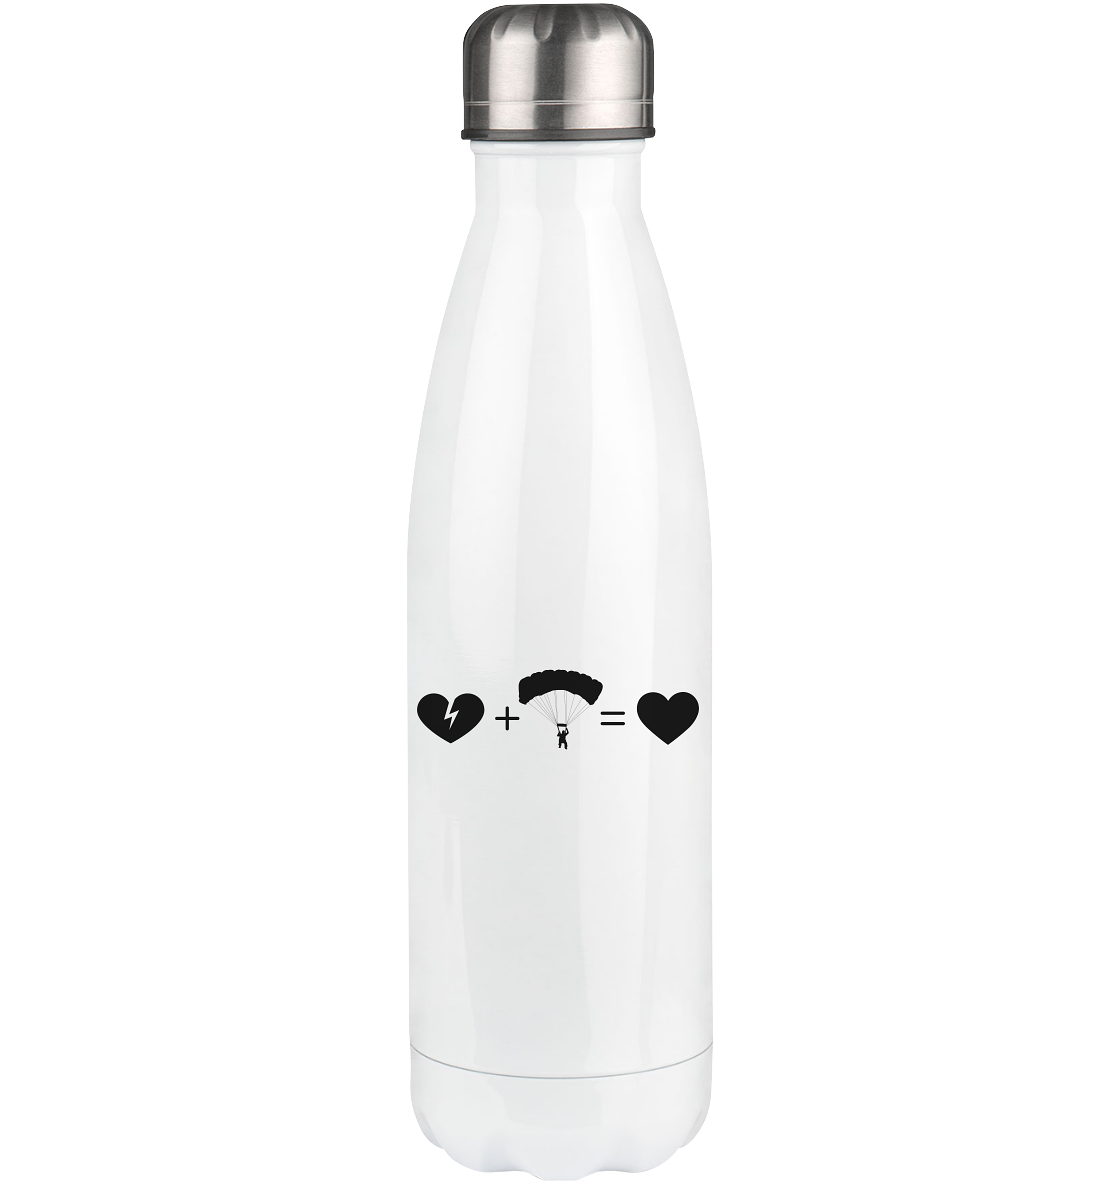 Broken Heart Heart and Paragliding - Edelstahl Thermosflasche berge 500ml